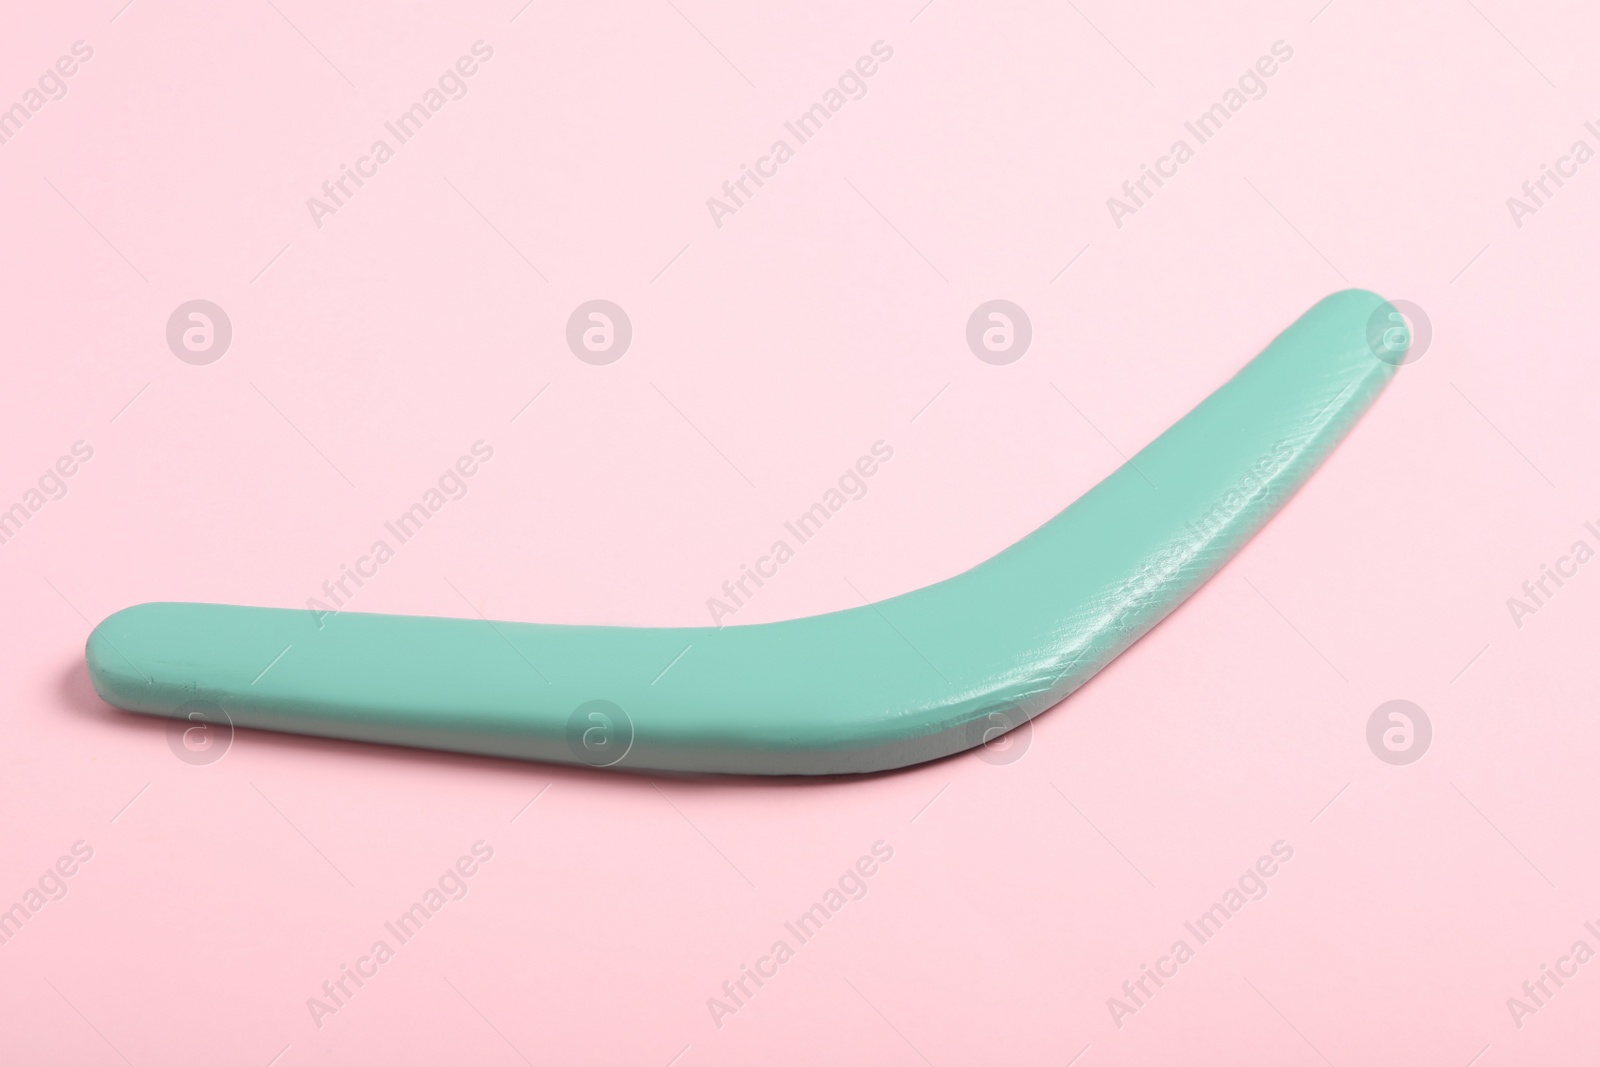 Photo of Turquoise wooden boomerang on pink background. Outdoor activity